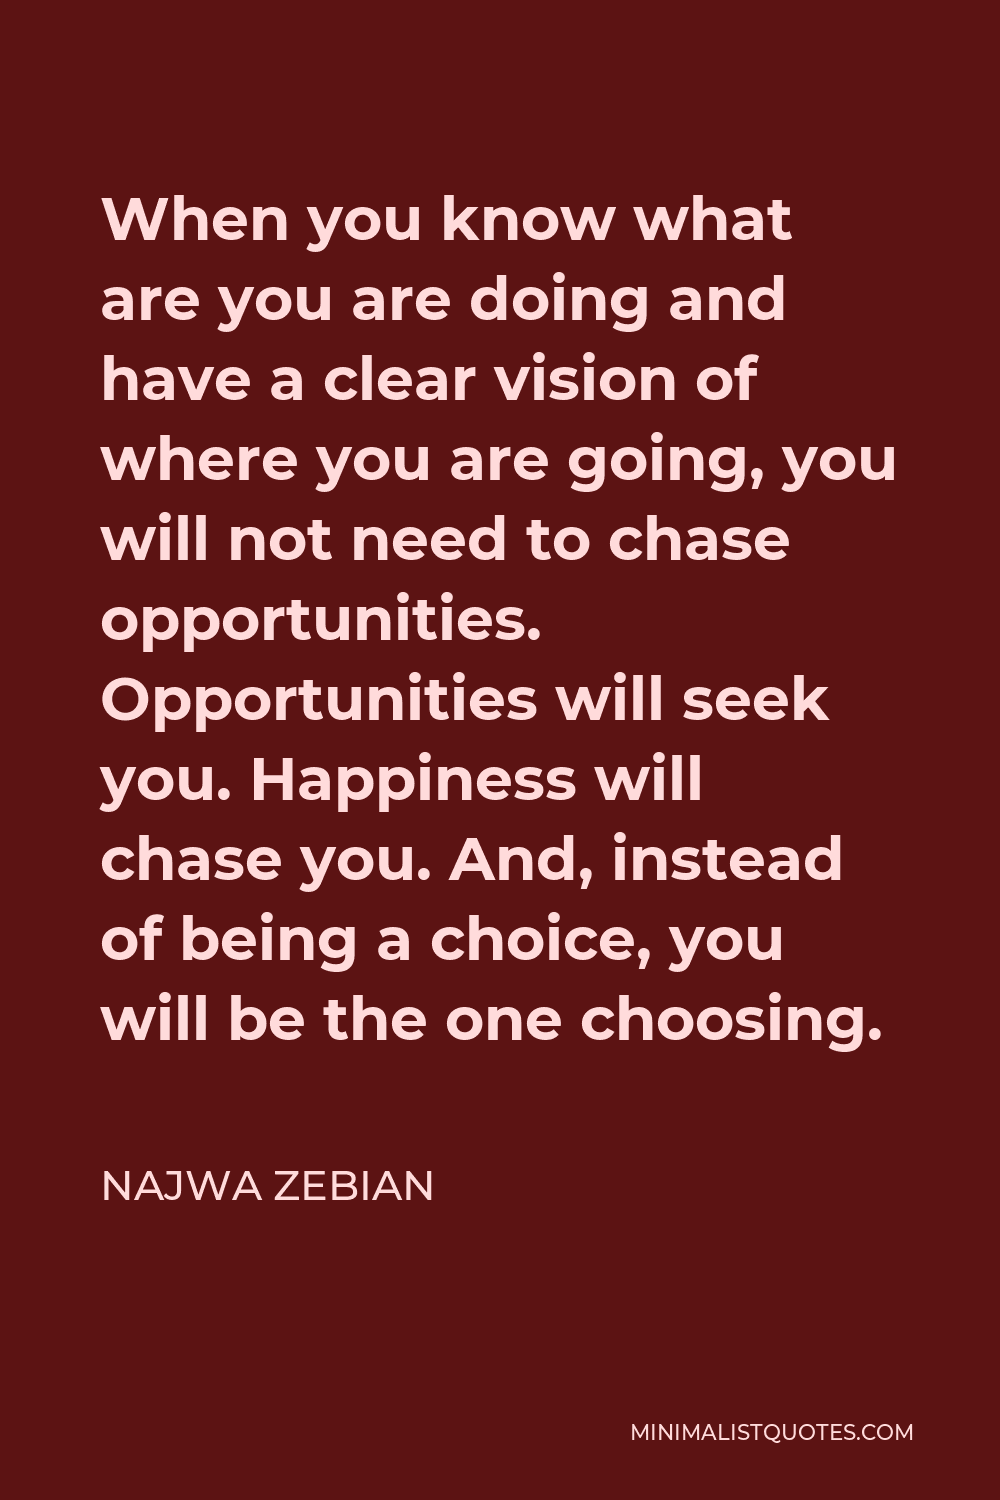 Najwa Zebian Quote - When you know what are you are doing and have a clear vision of where you are going, you will not need to chase opportunities. Opportunities will seek you. Happiness will chase you. And, instead of being a choice, you will be the one choosing.